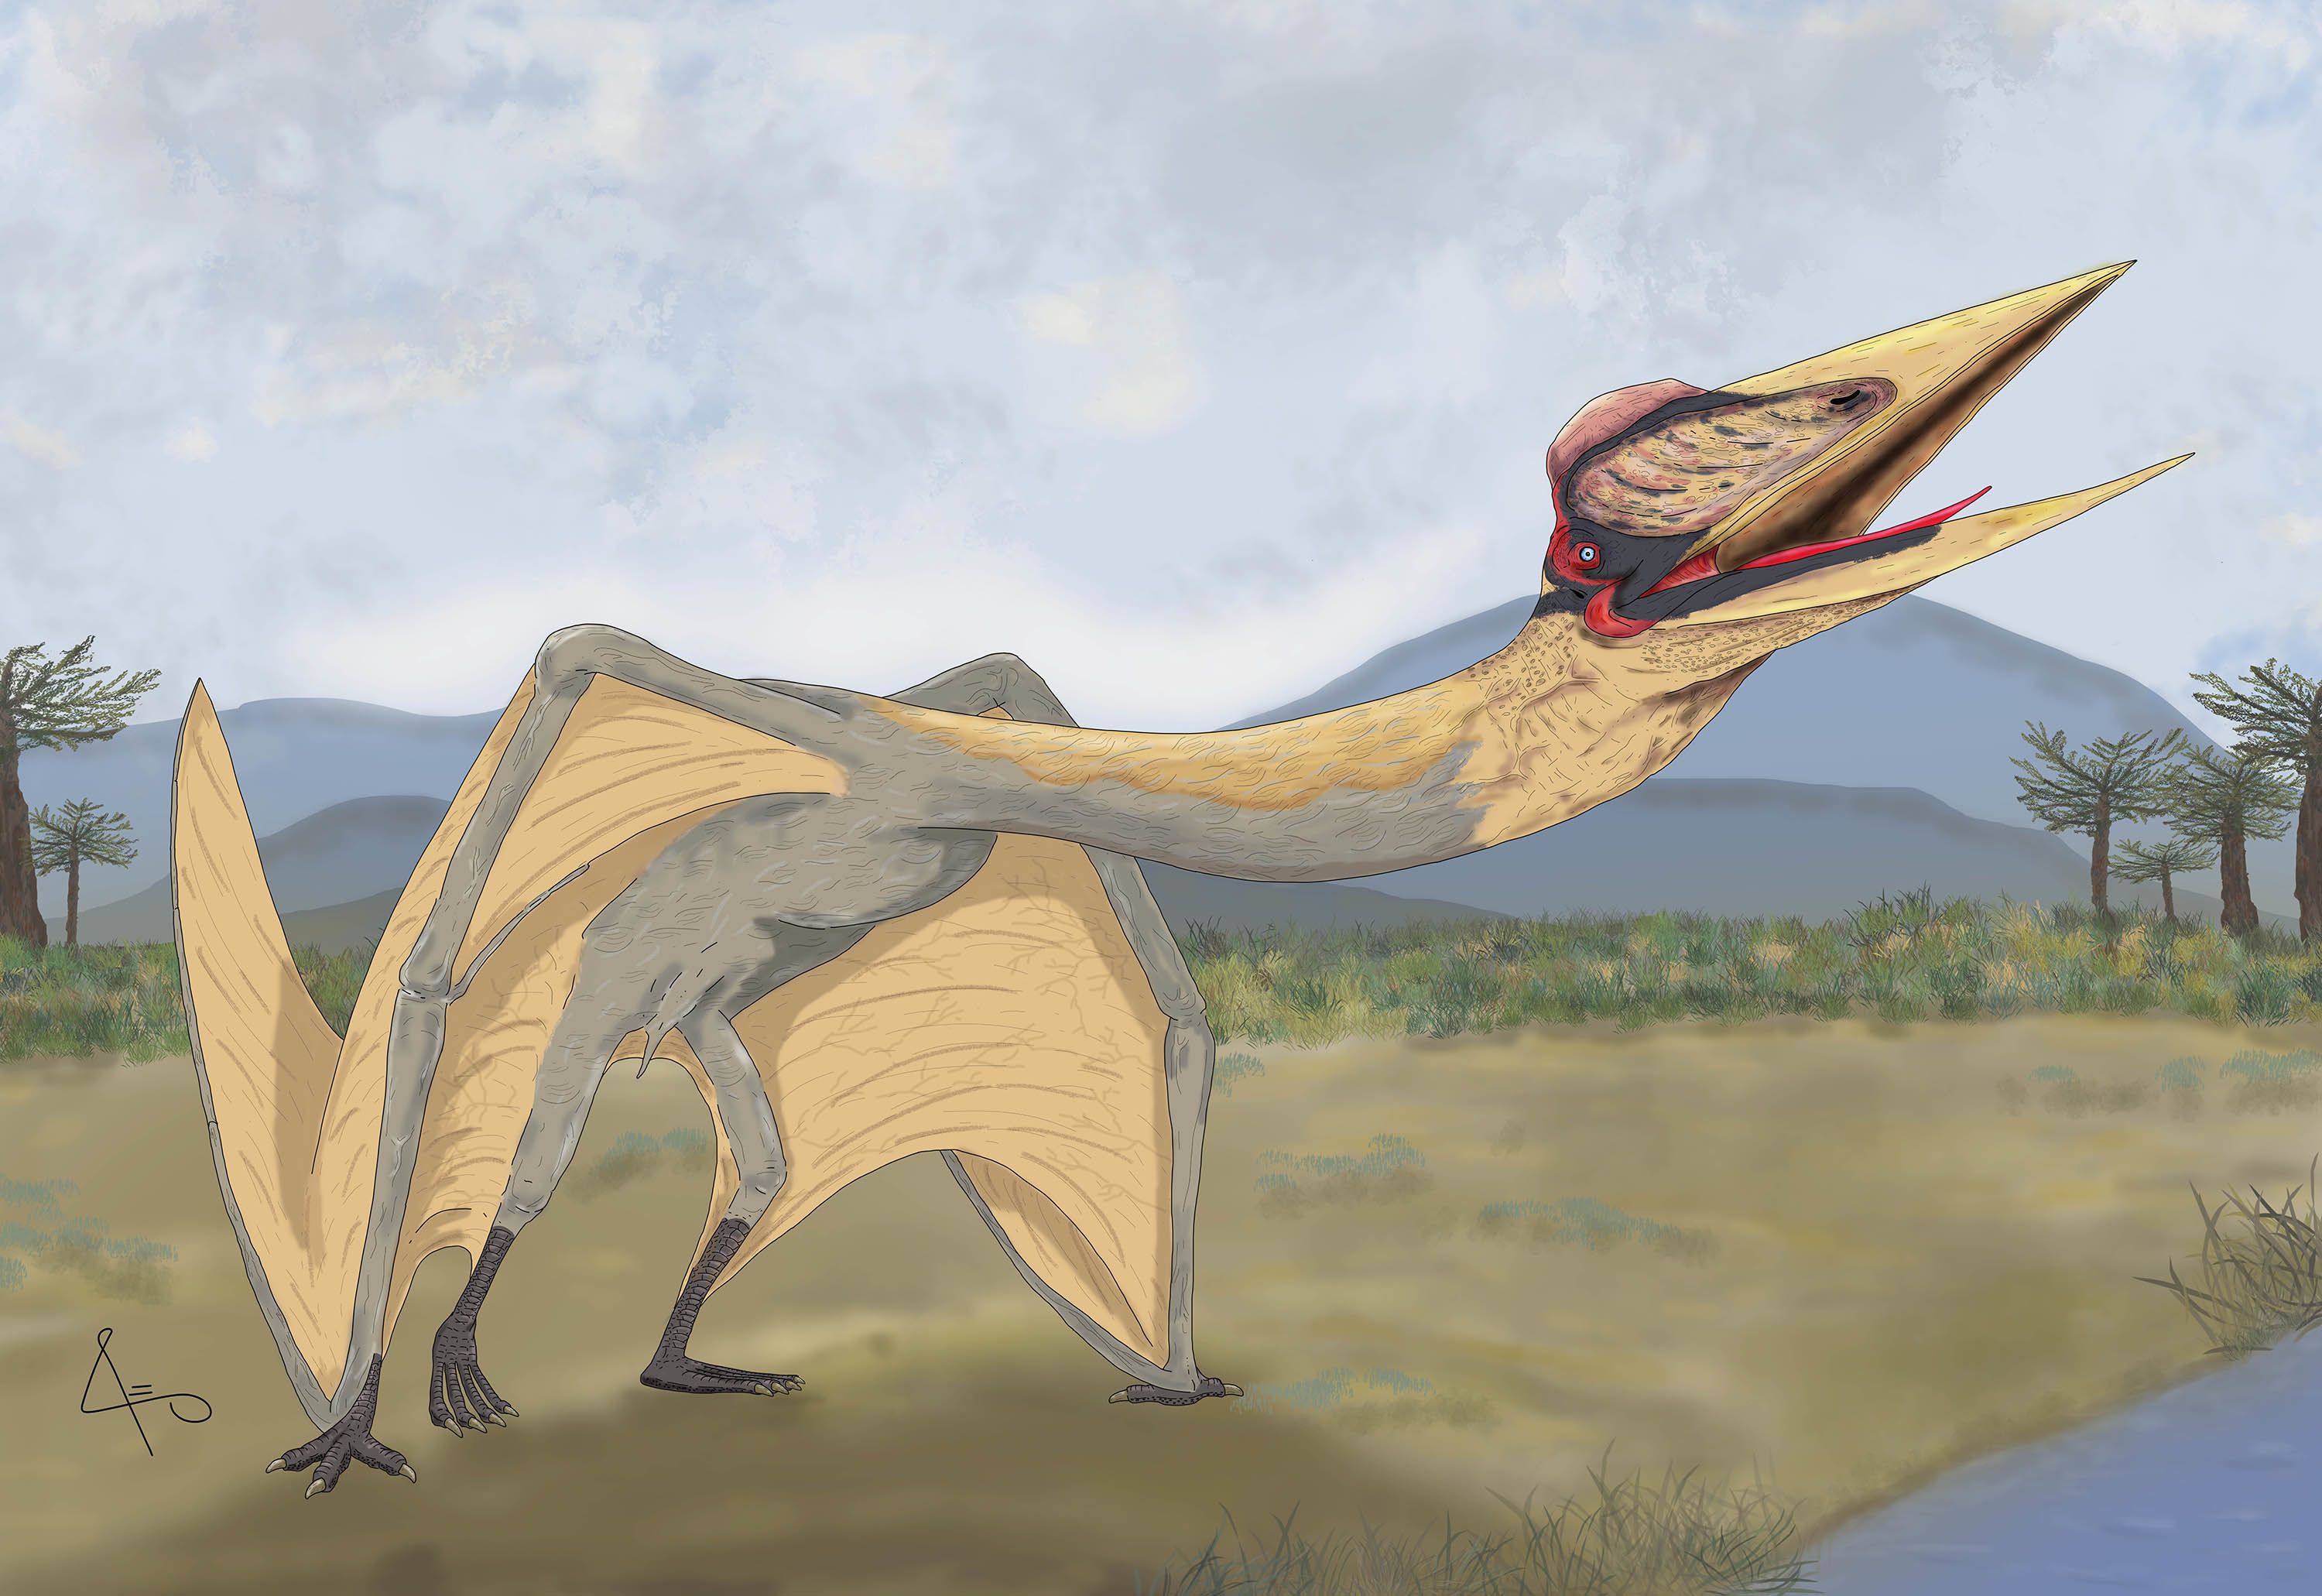 Pterosaur Facts – Amazing Flying Reptiles That Lived With Dinosaurs